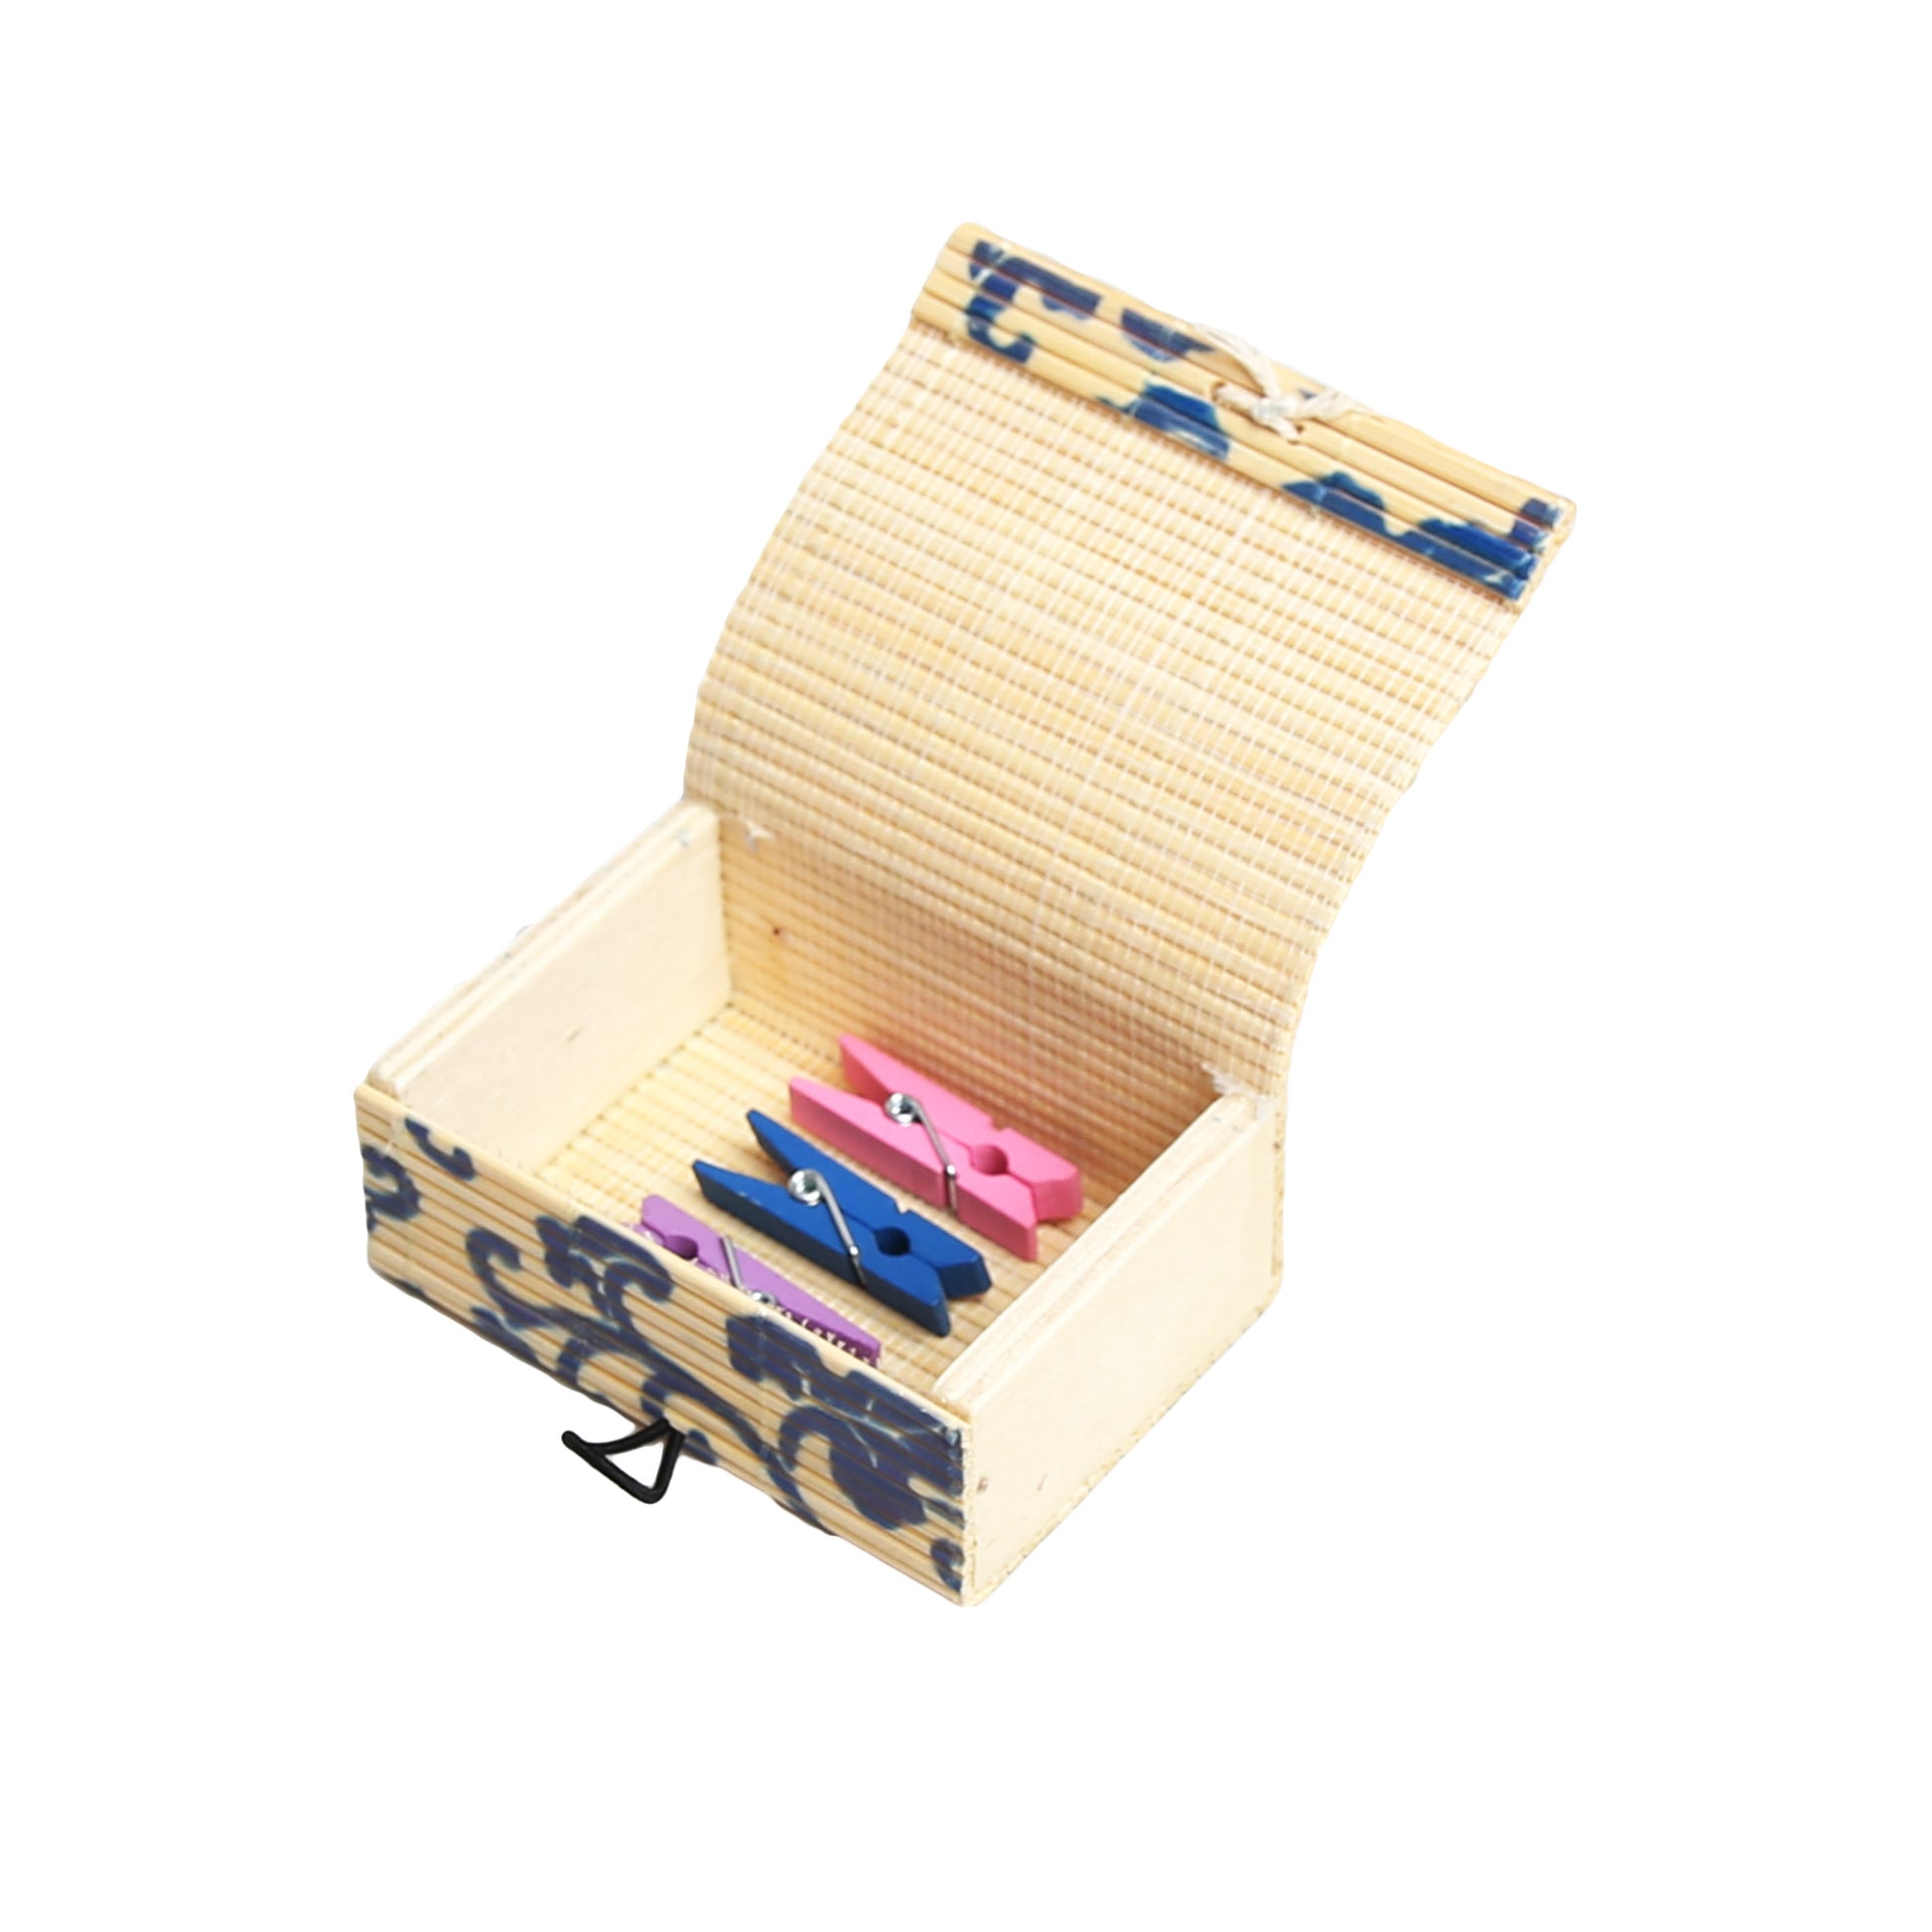 DAISYLIFE Bamboo Printed Design Box for Storage, Utitlity & Gifts - Set of 12